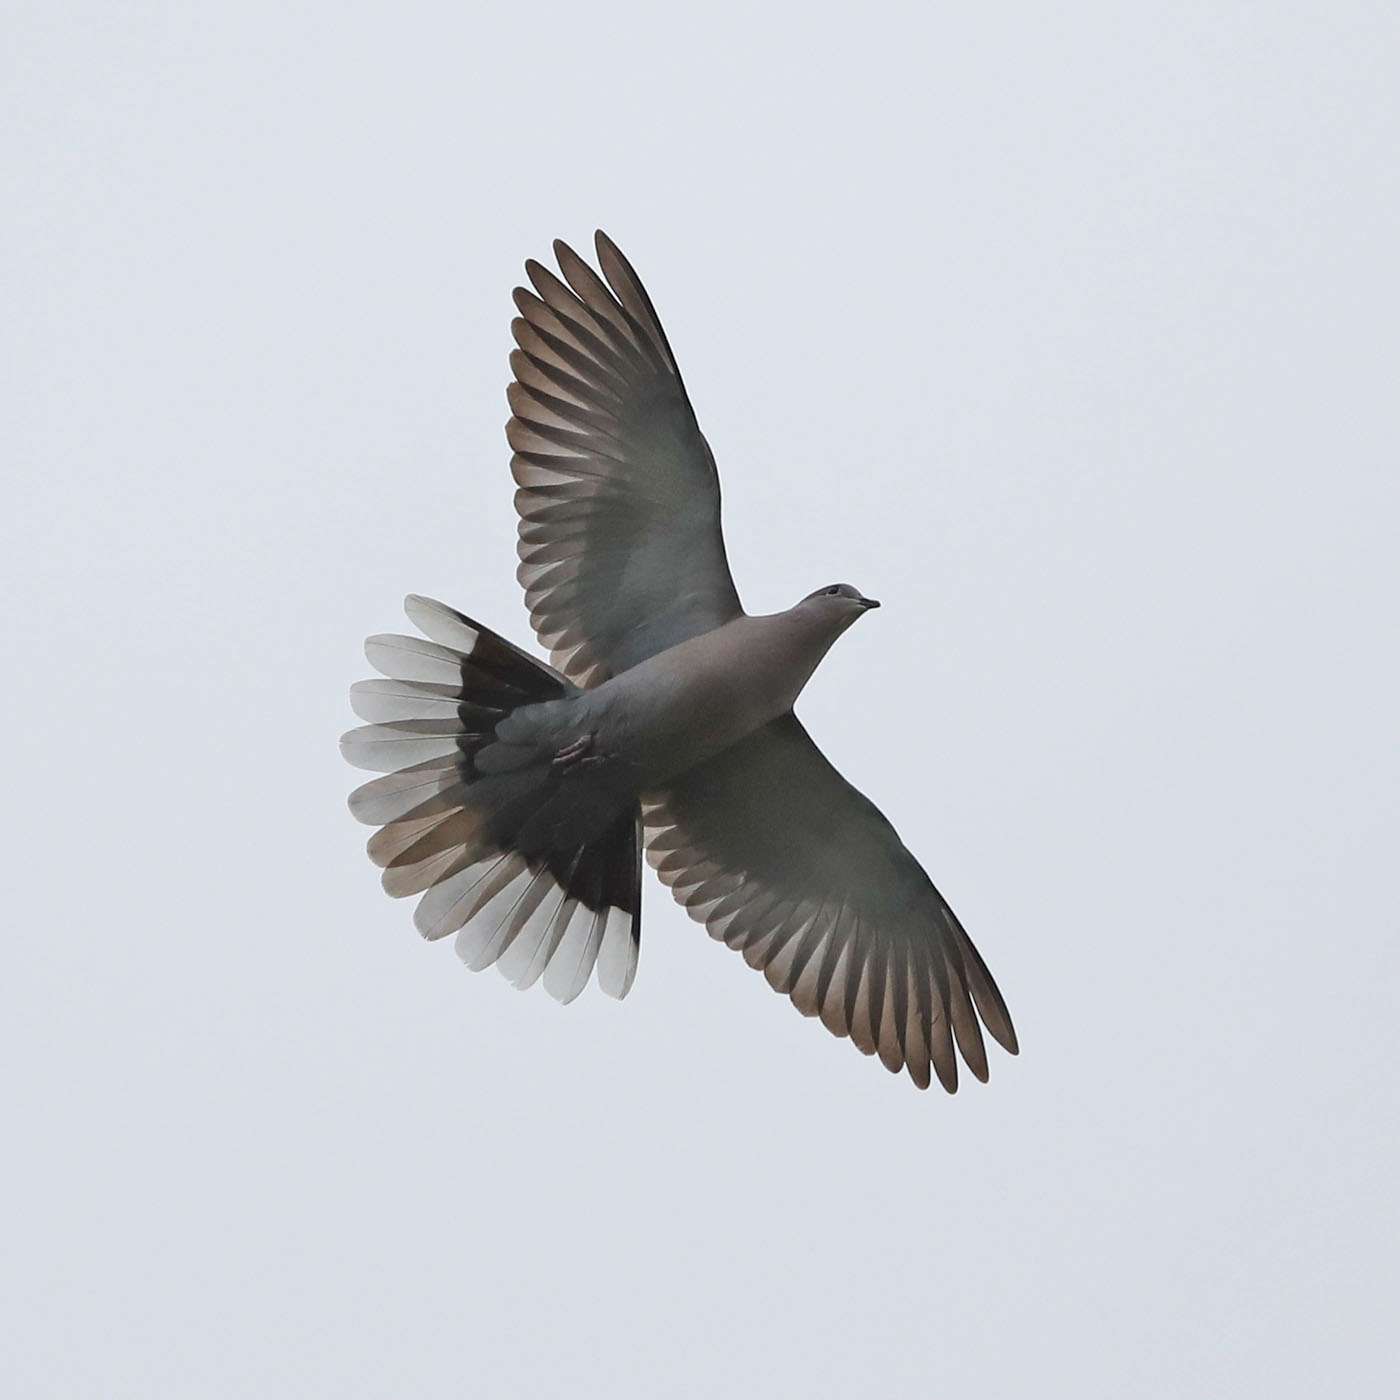 Collared Dove by Steve Hopper at South Brent